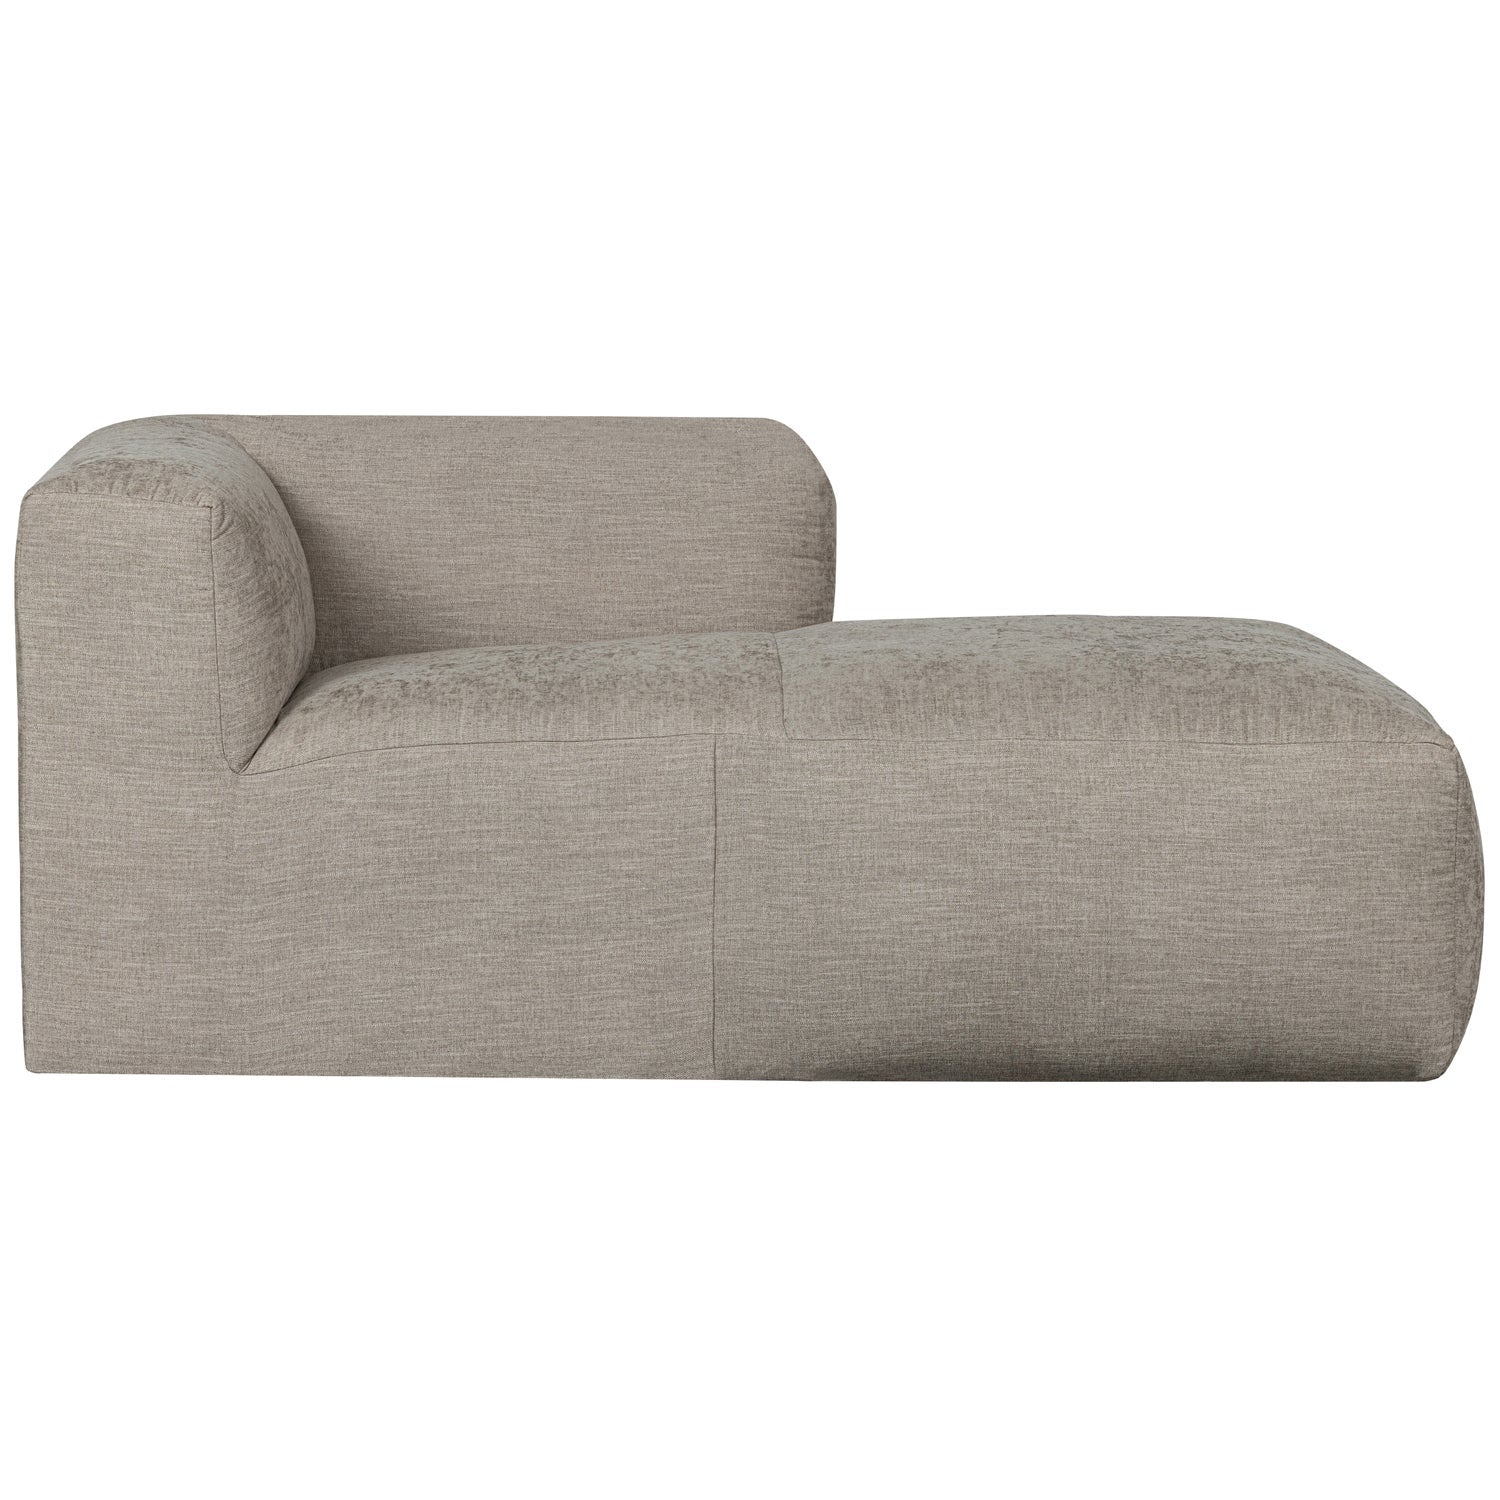 YENT CHAISE LONGUE ELEMENT ARM RIGHT WOVEN FABRIC NATURAL